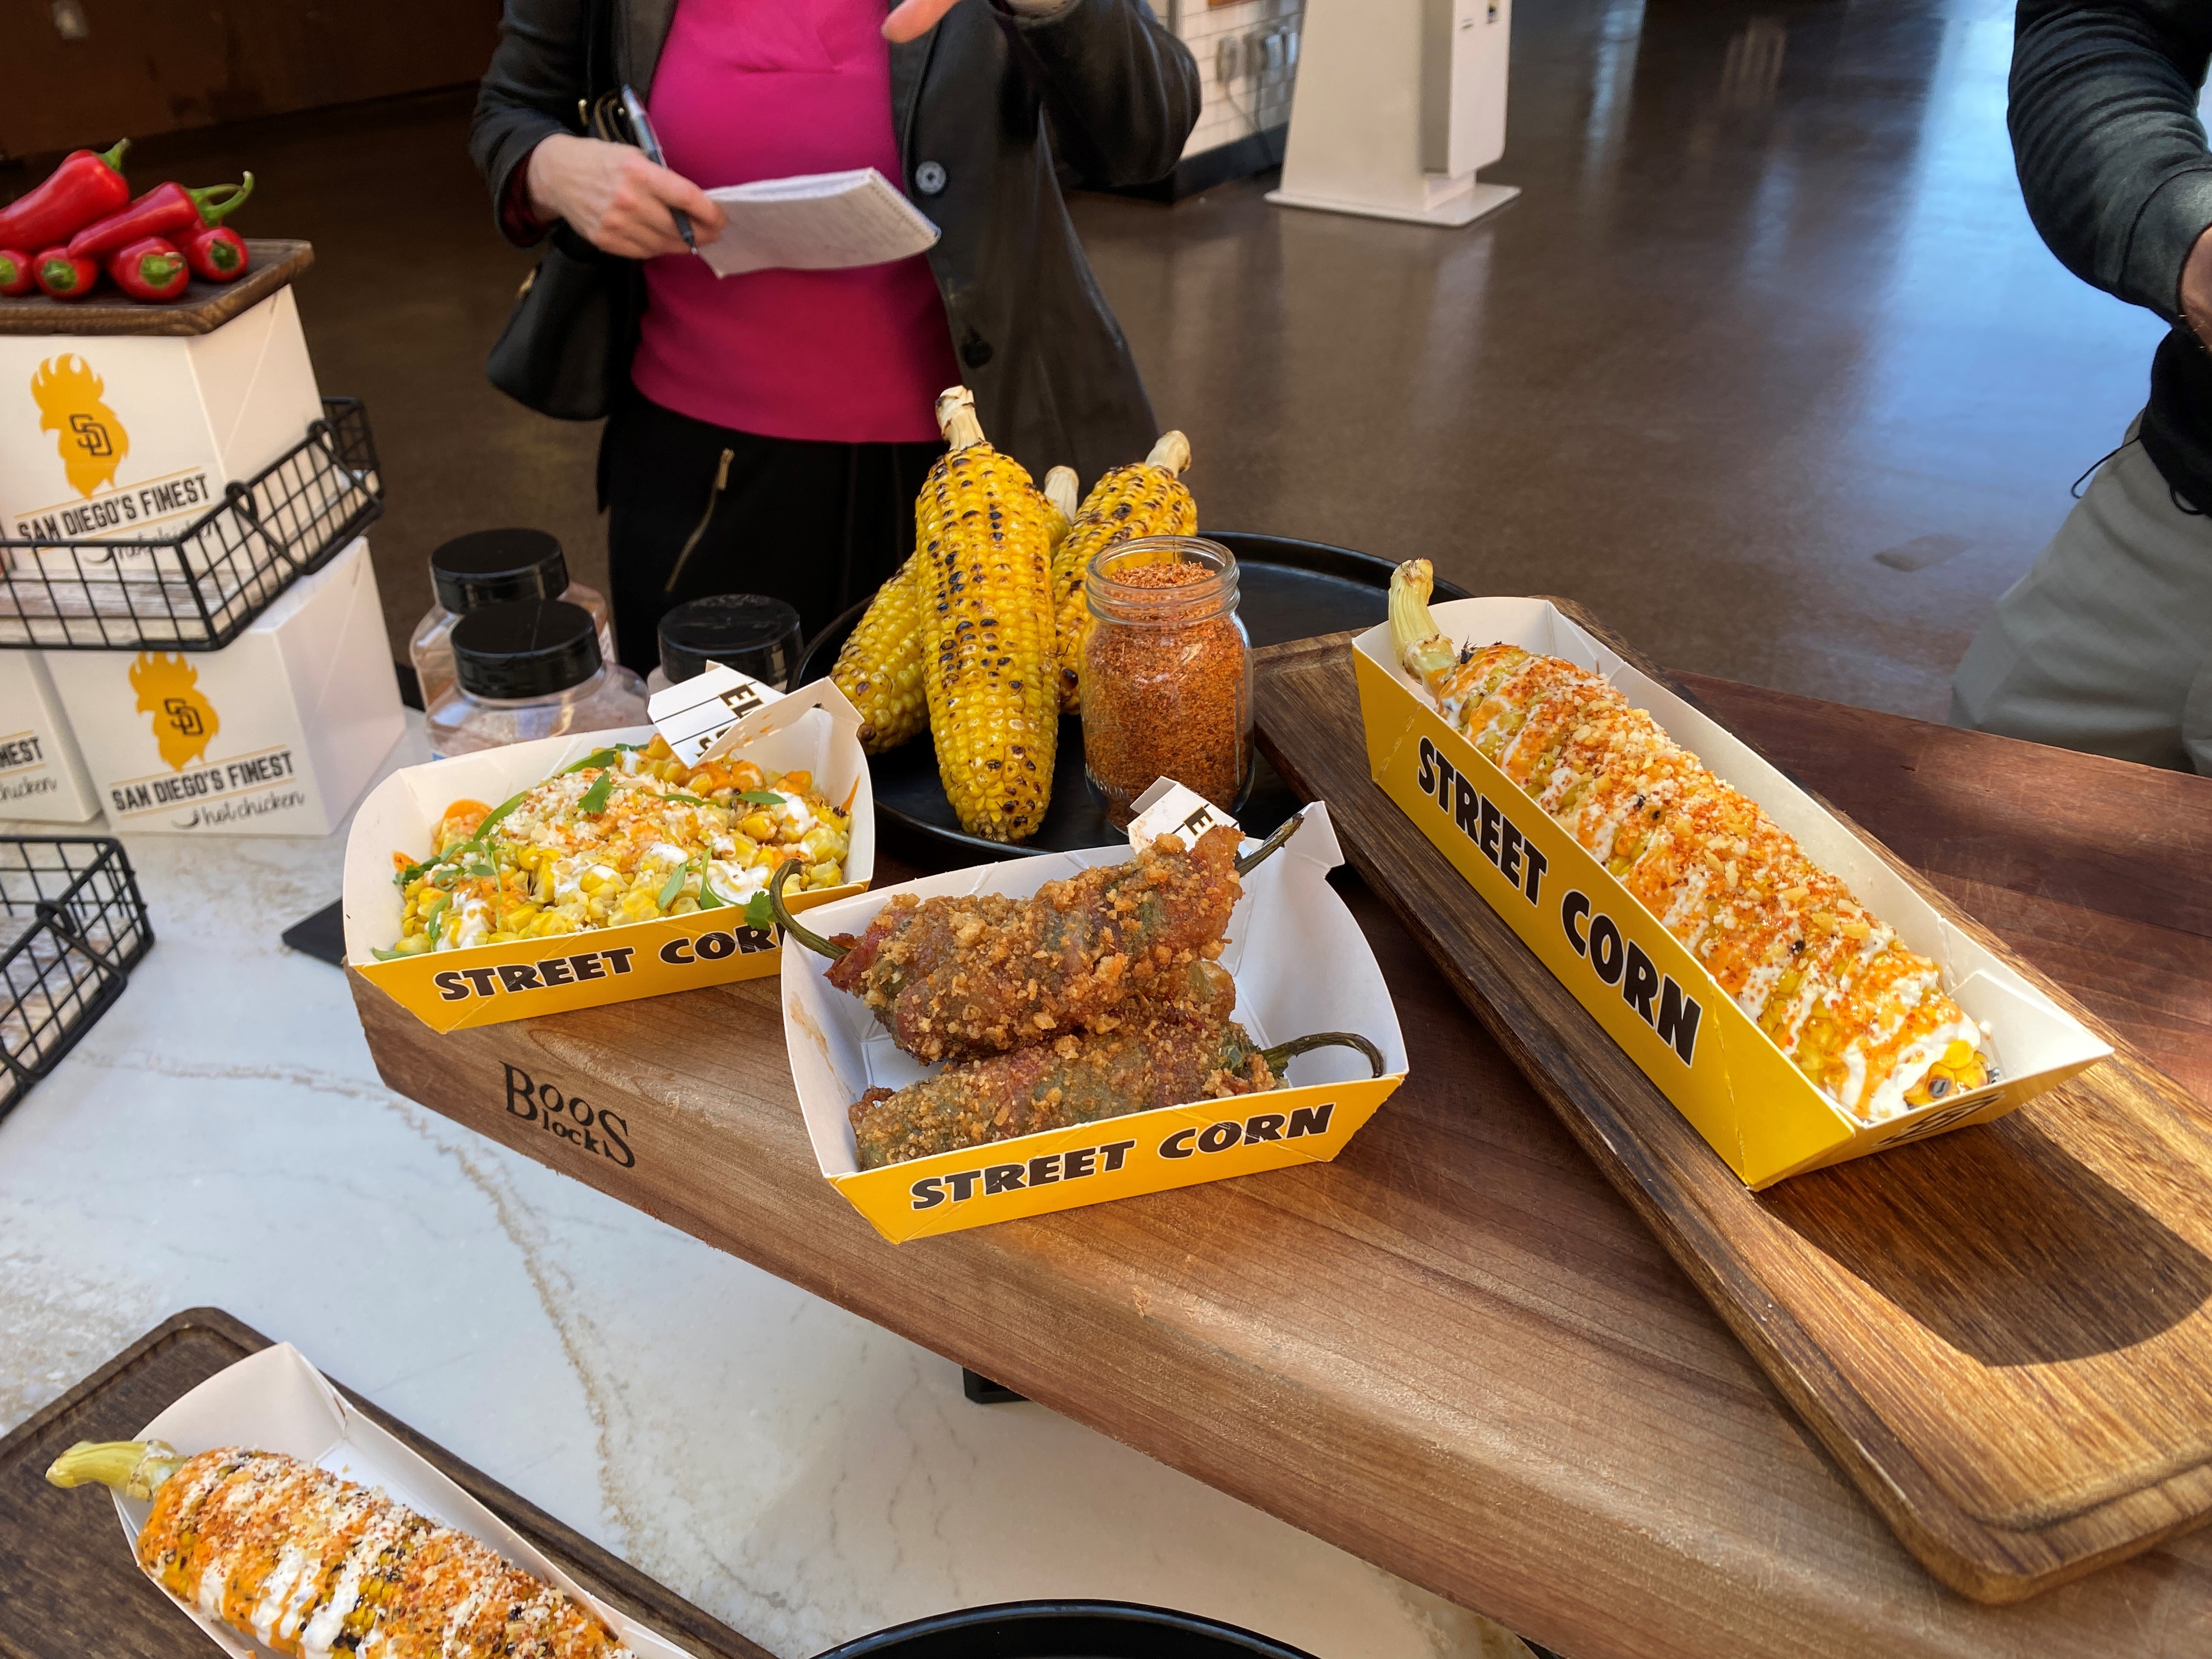 A new cart concept on the Main Concourse featuring authentic Elote on or off the cob. Found in Section 100.